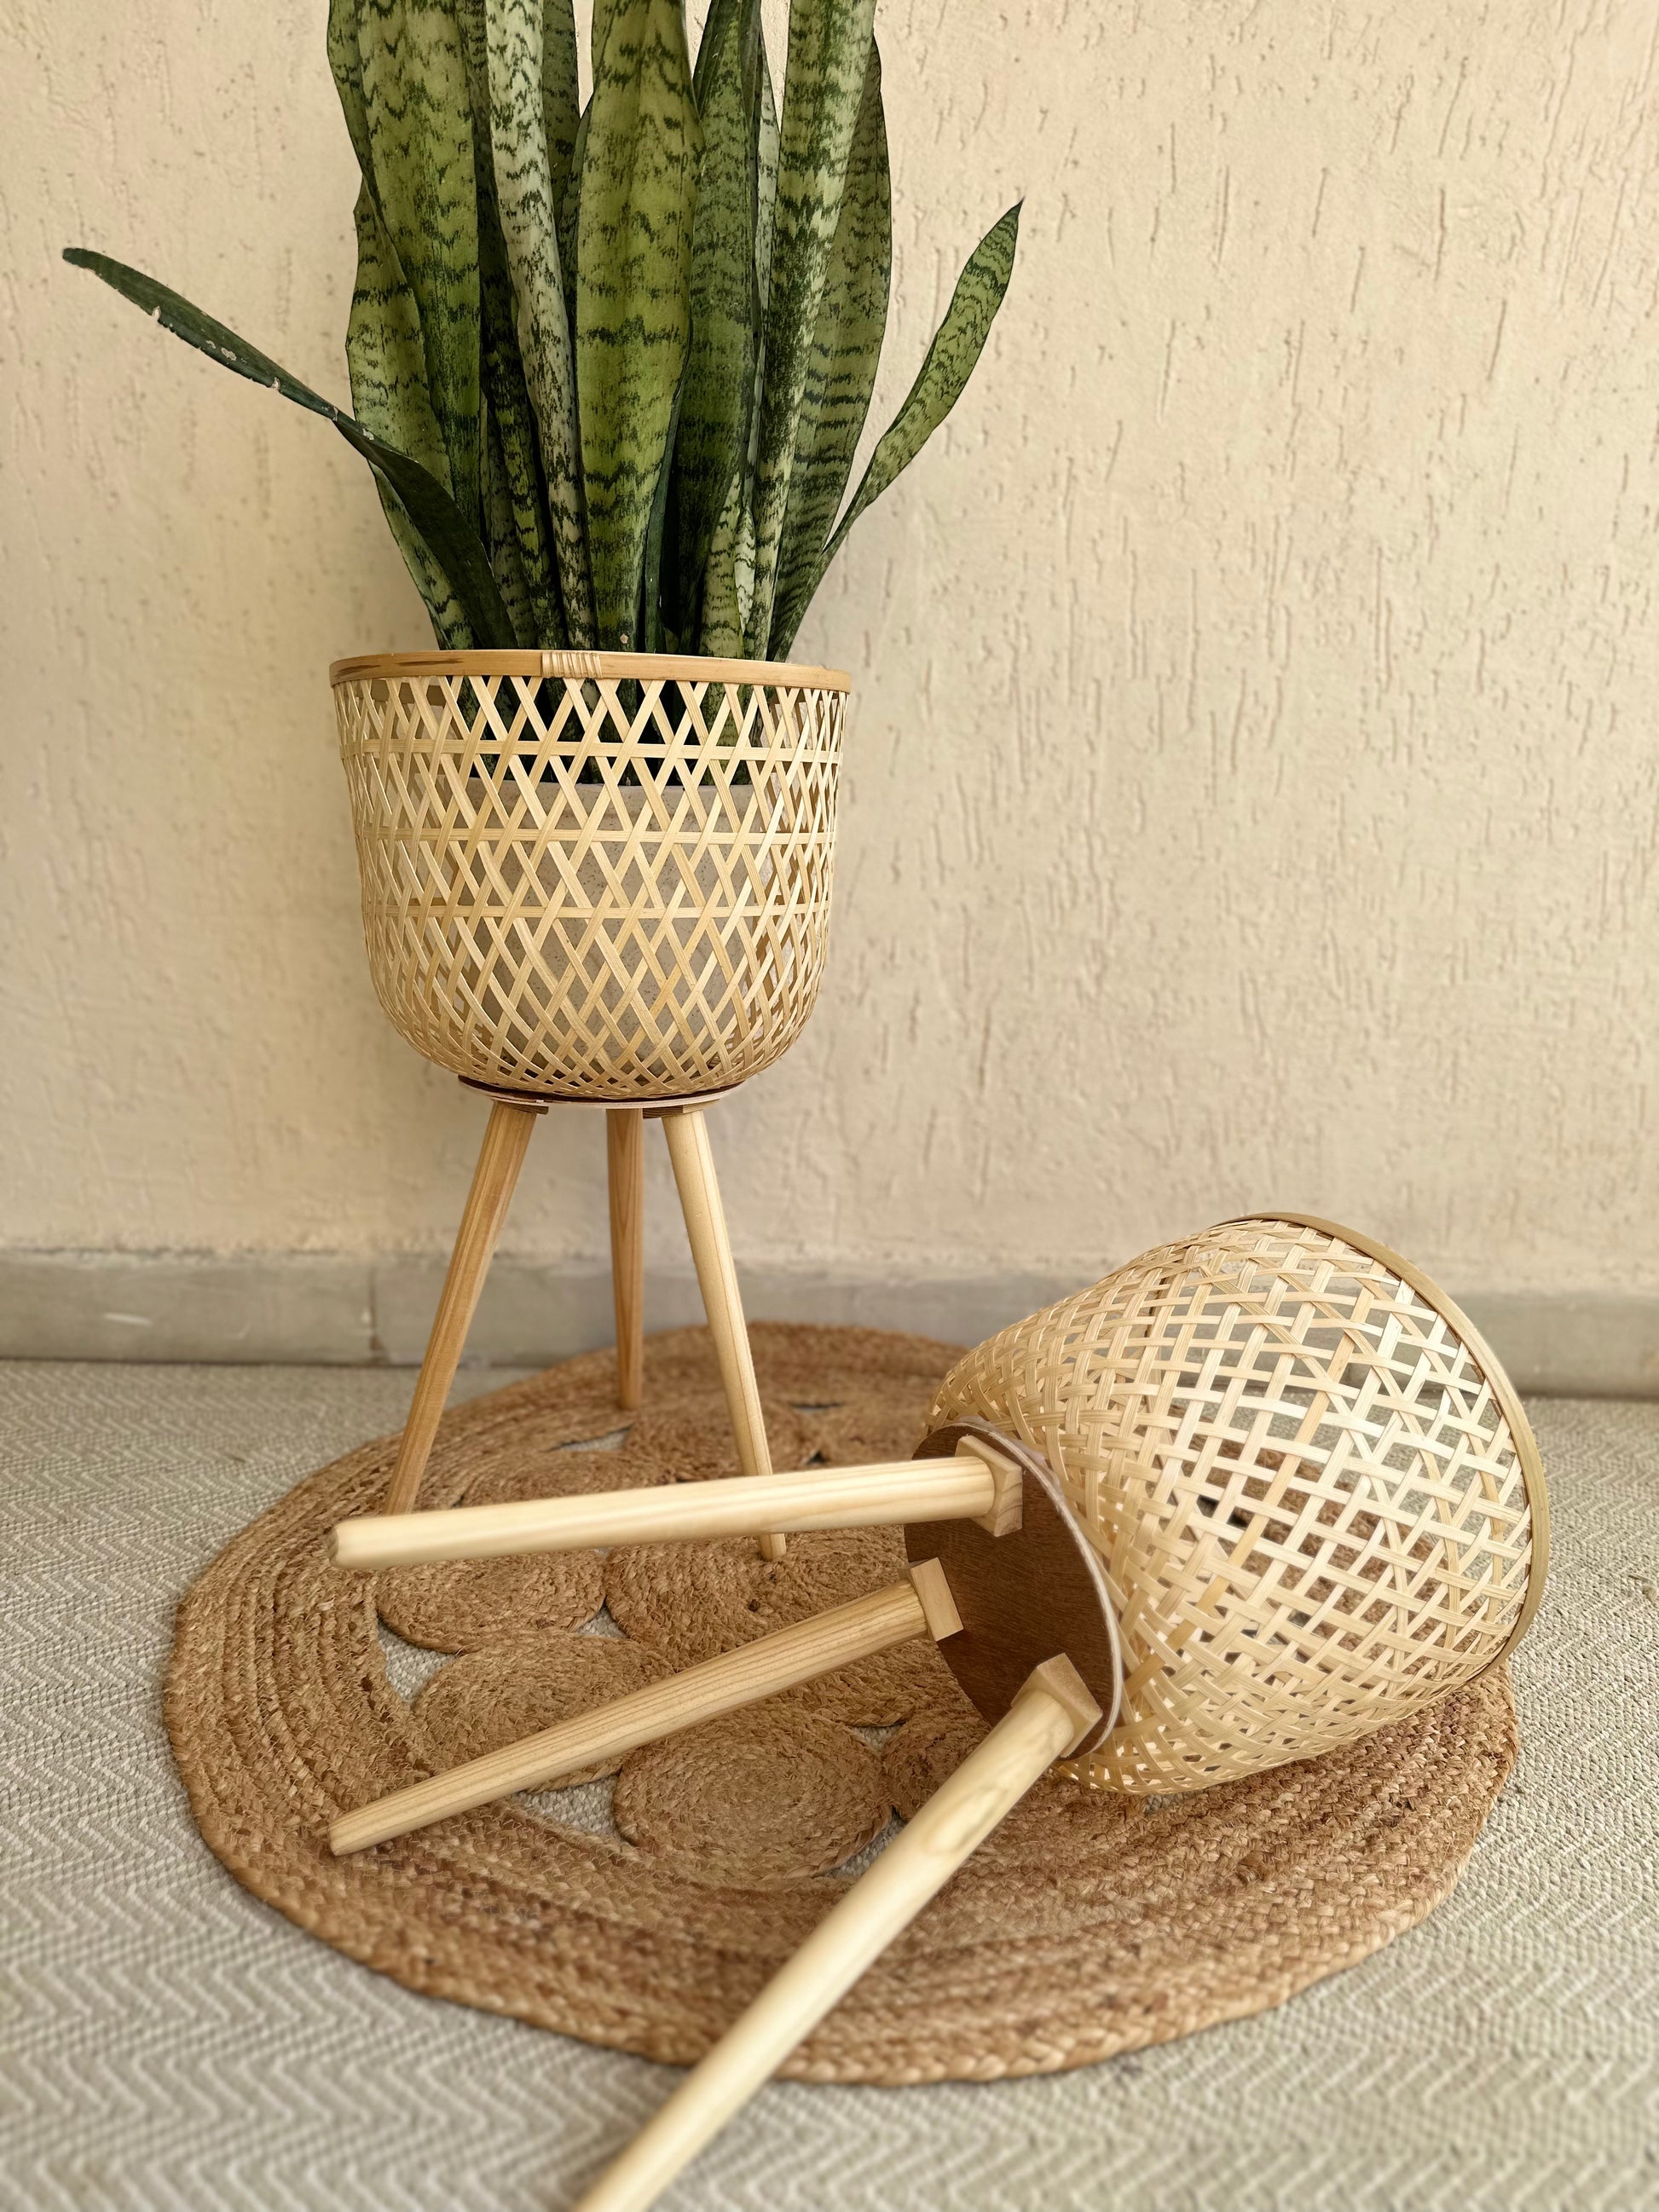 bamboo light planter tesu with folding legs boho home style setup.Enhance your Dream Home with our curated selection of premium Home Décor items.  Typically crafted Bamboo woven planter with removable wooden legs are creating an eco -friendly and aesthetically pleasing container for plants. Its intricate handwoven design adds a touch of rustic charm to any to indoors as well as covered outdoor spaces like the living room, balcony, patio or a roofed terrace. tesu